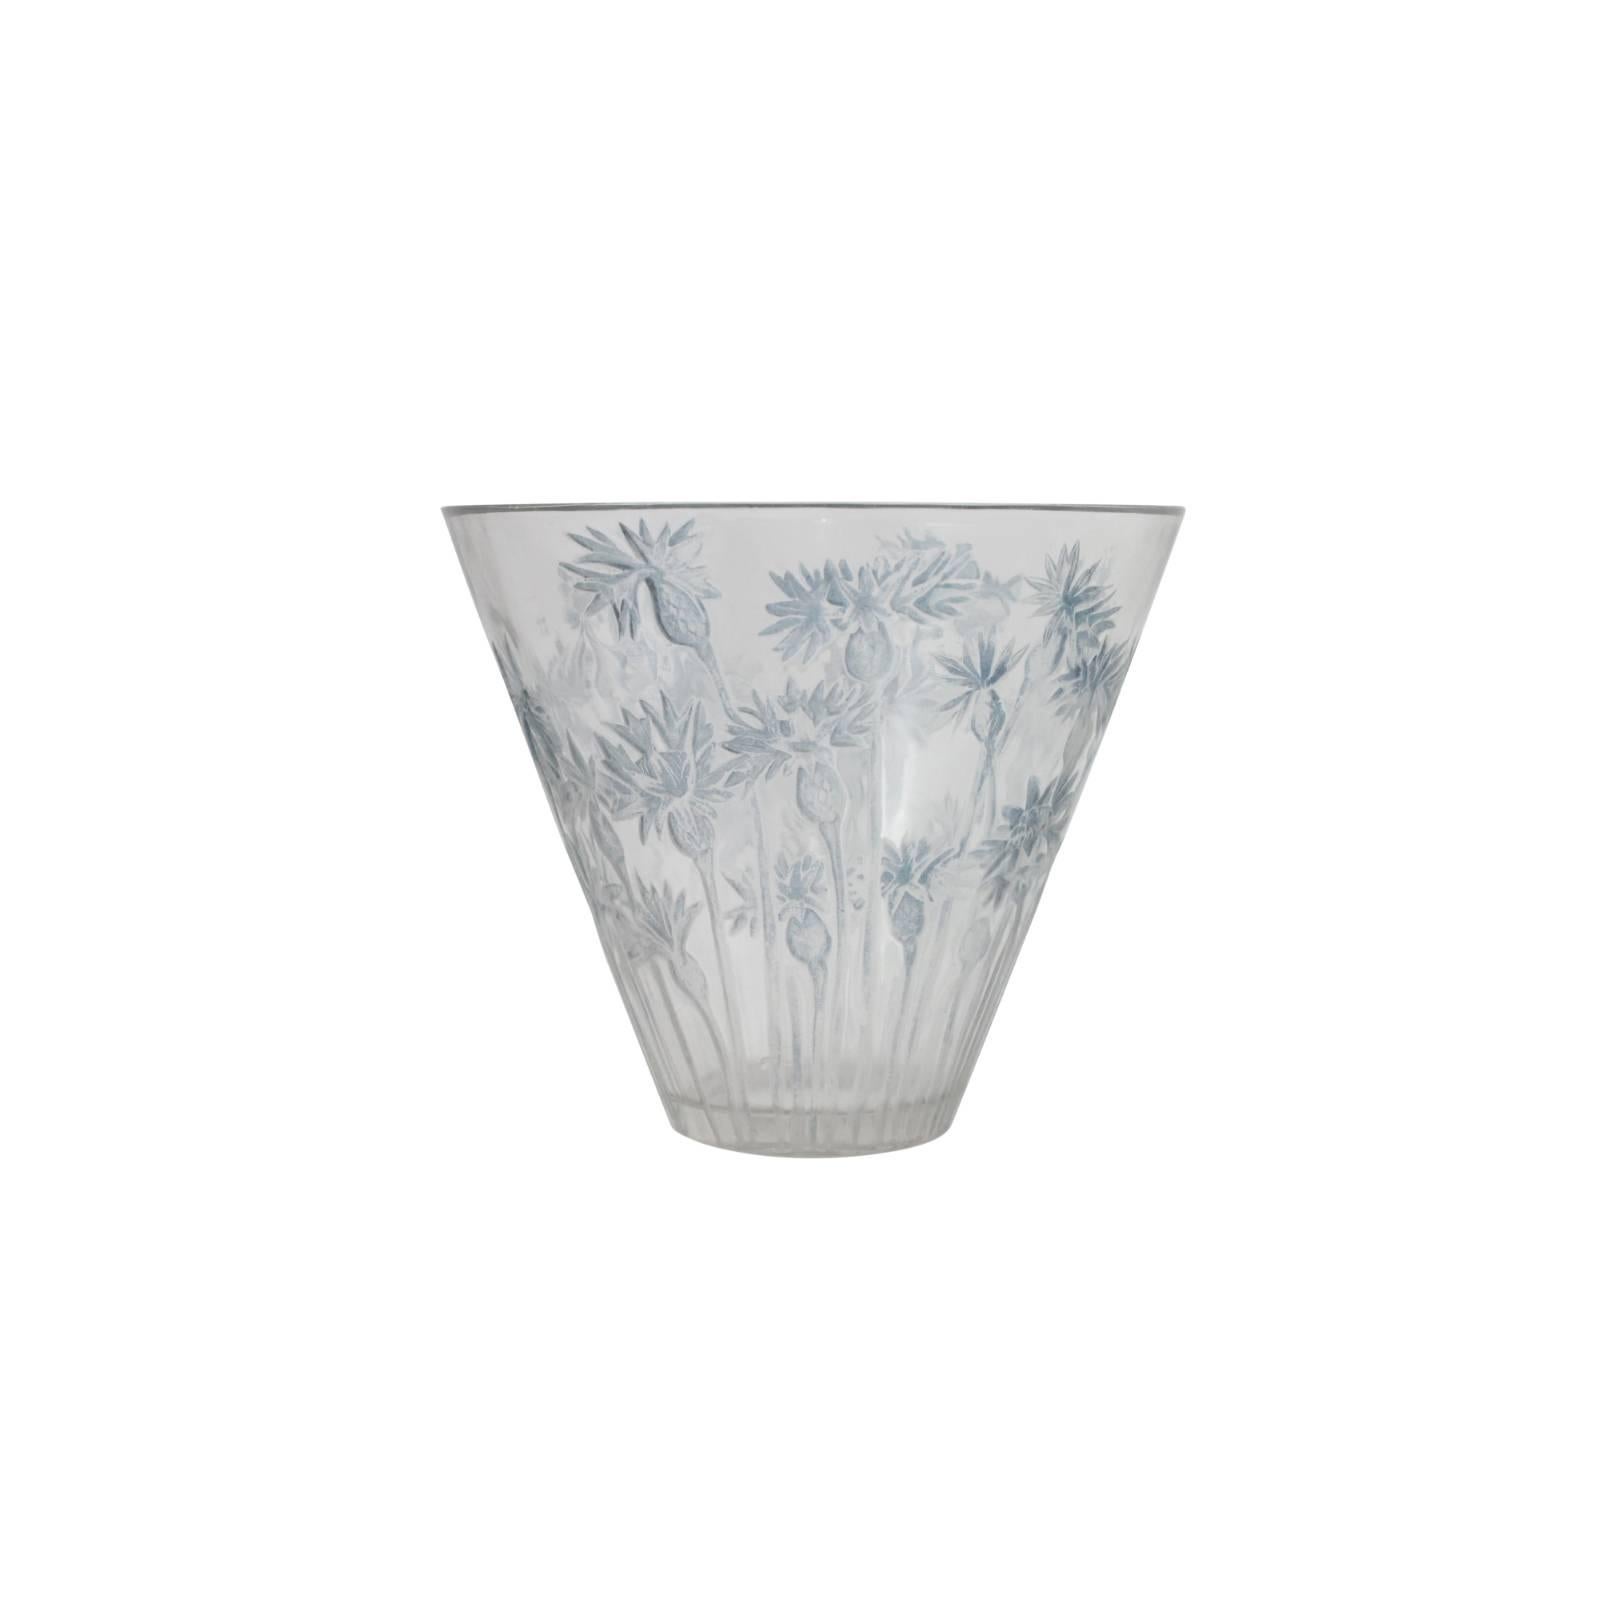 French Art Deco 'Bluets' Glass Vase by Rene Lalique For Sale